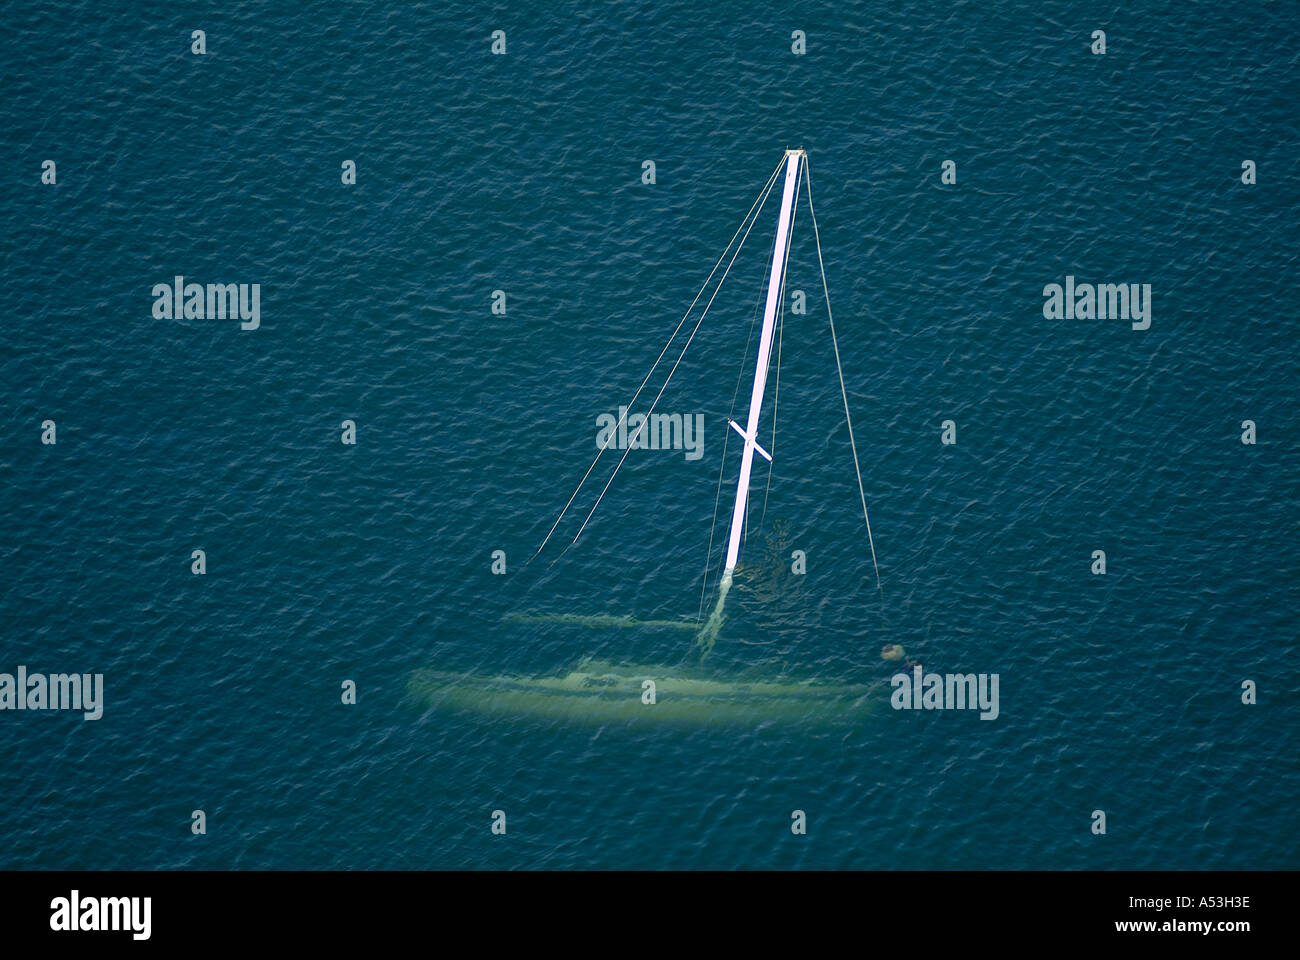 sunken sailboat boating bad luck founder boats loss costly Stock Photo